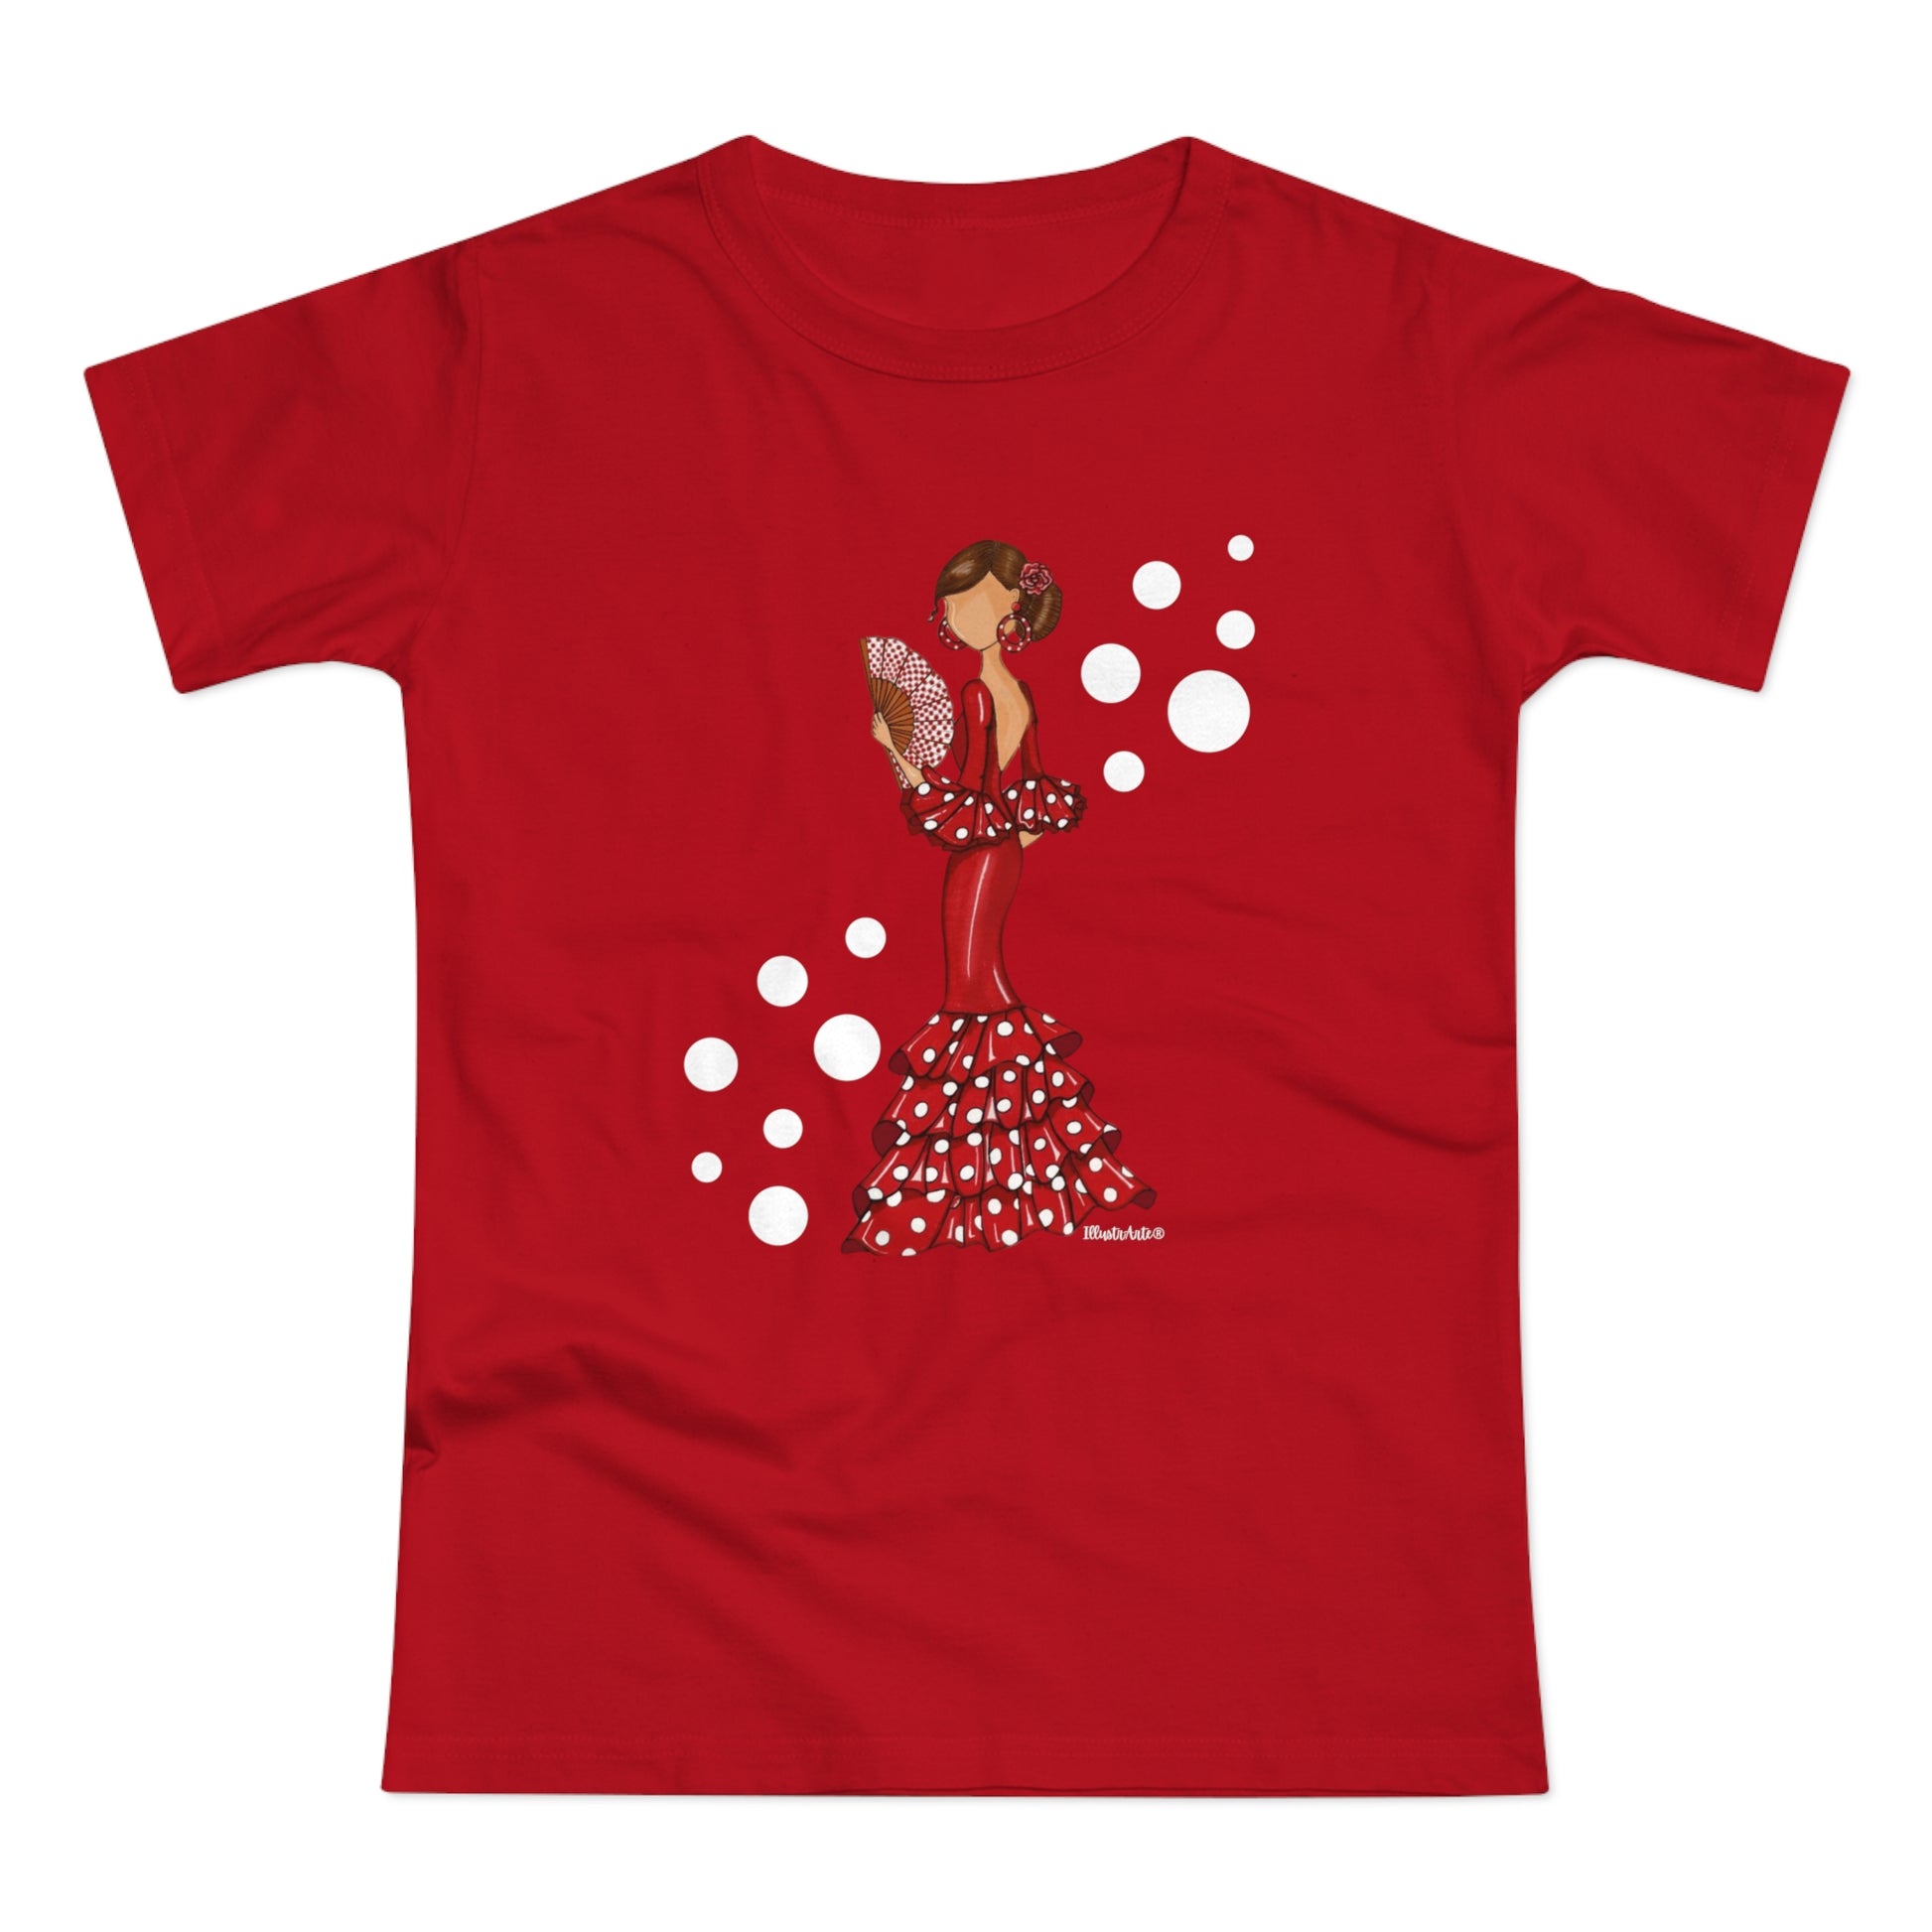 a red t - shirt with a woman in a polka dot dress